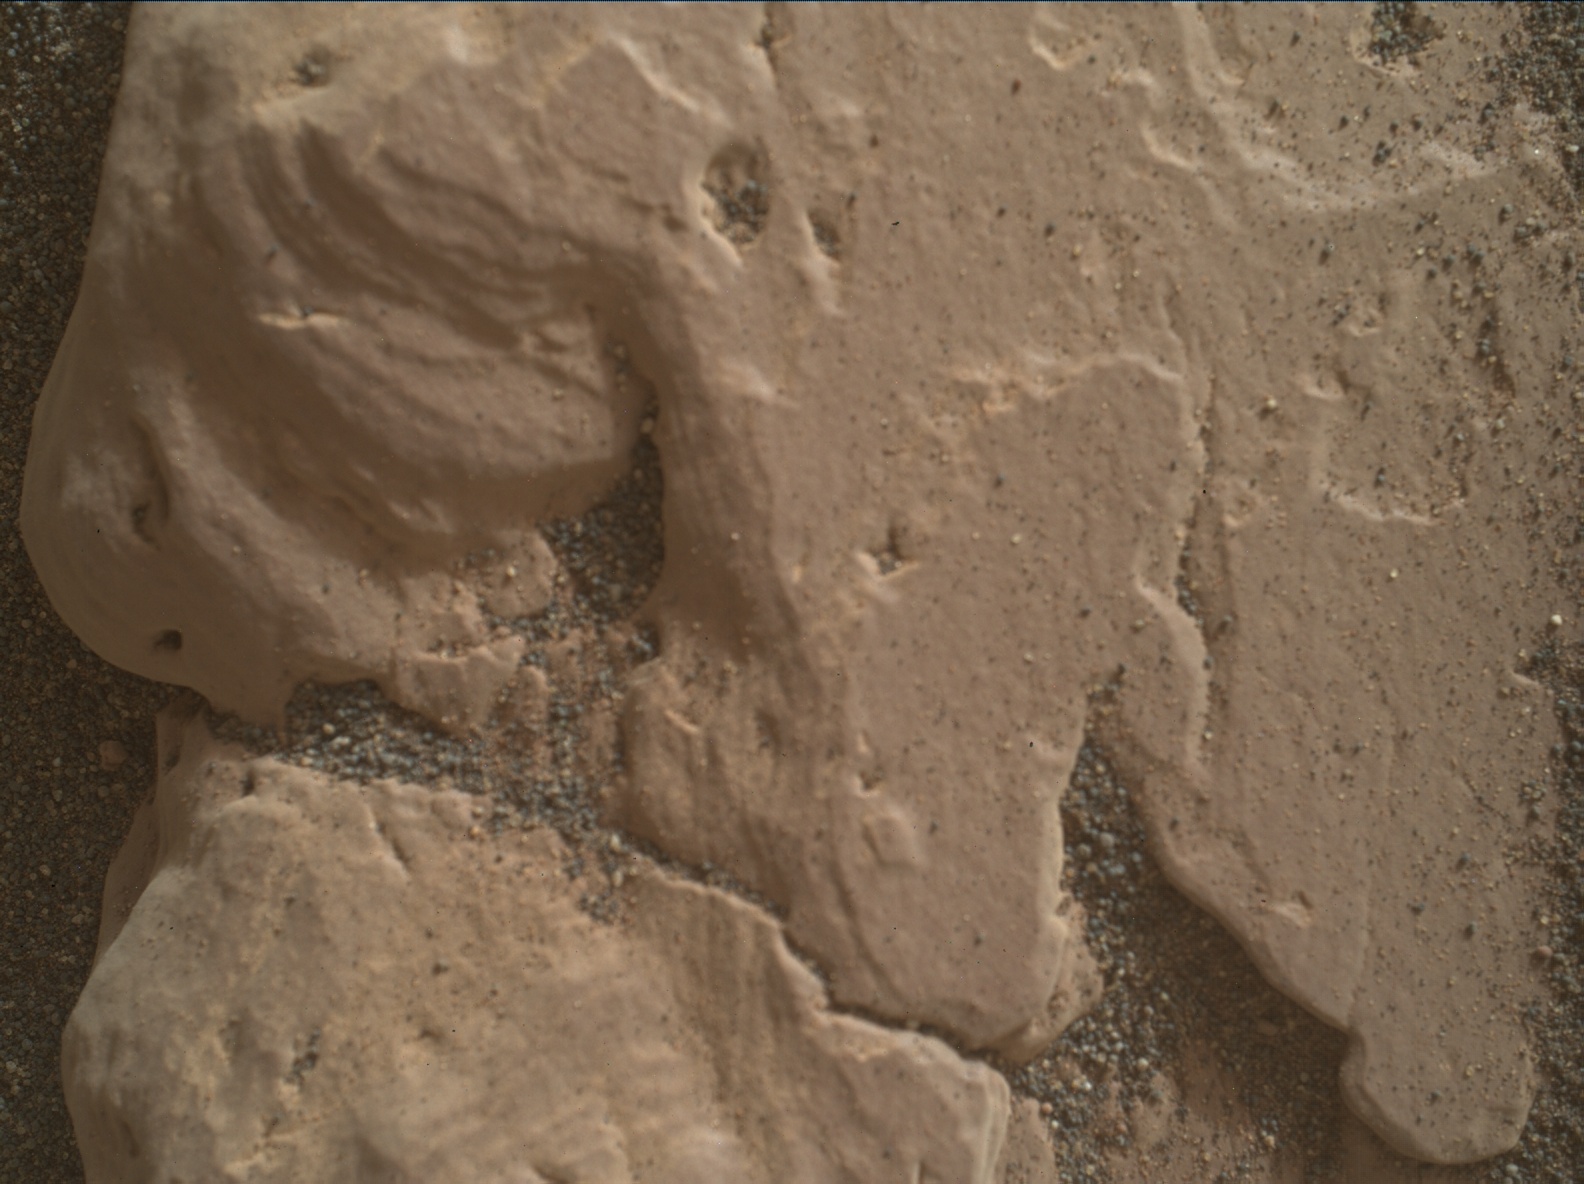 Nasa's Mars rover Curiosity acquired this image using its Mars Hand Lens Imager (MAHLI) on Sol 2363